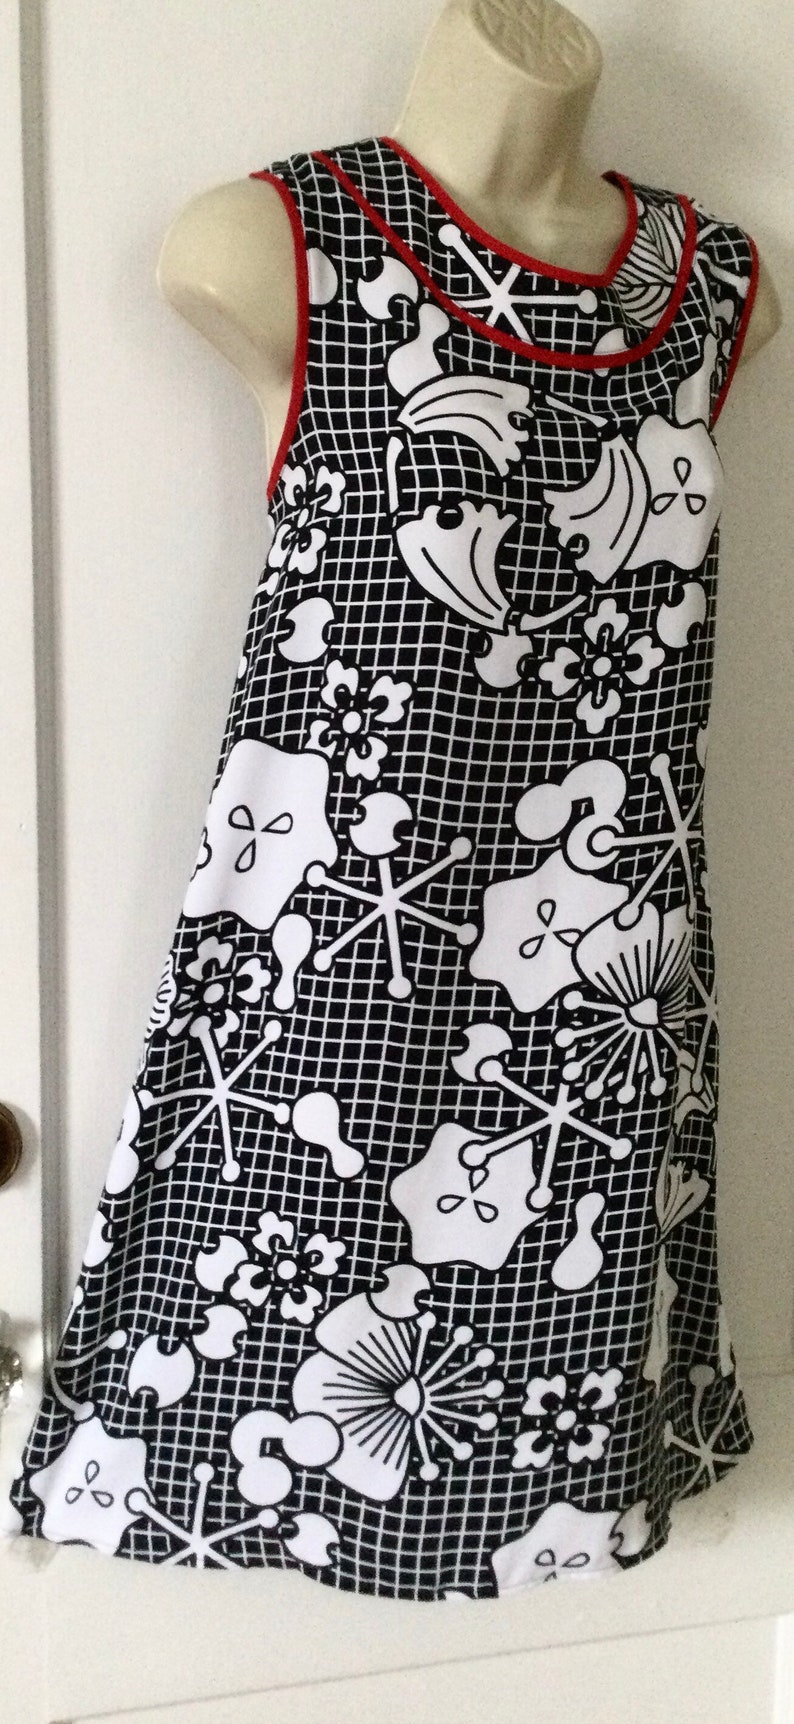 New KENZO Black White Floral Dress NWT Black/White Red Piping Floral Print A-Line KENZO Dress Size 42 image 9